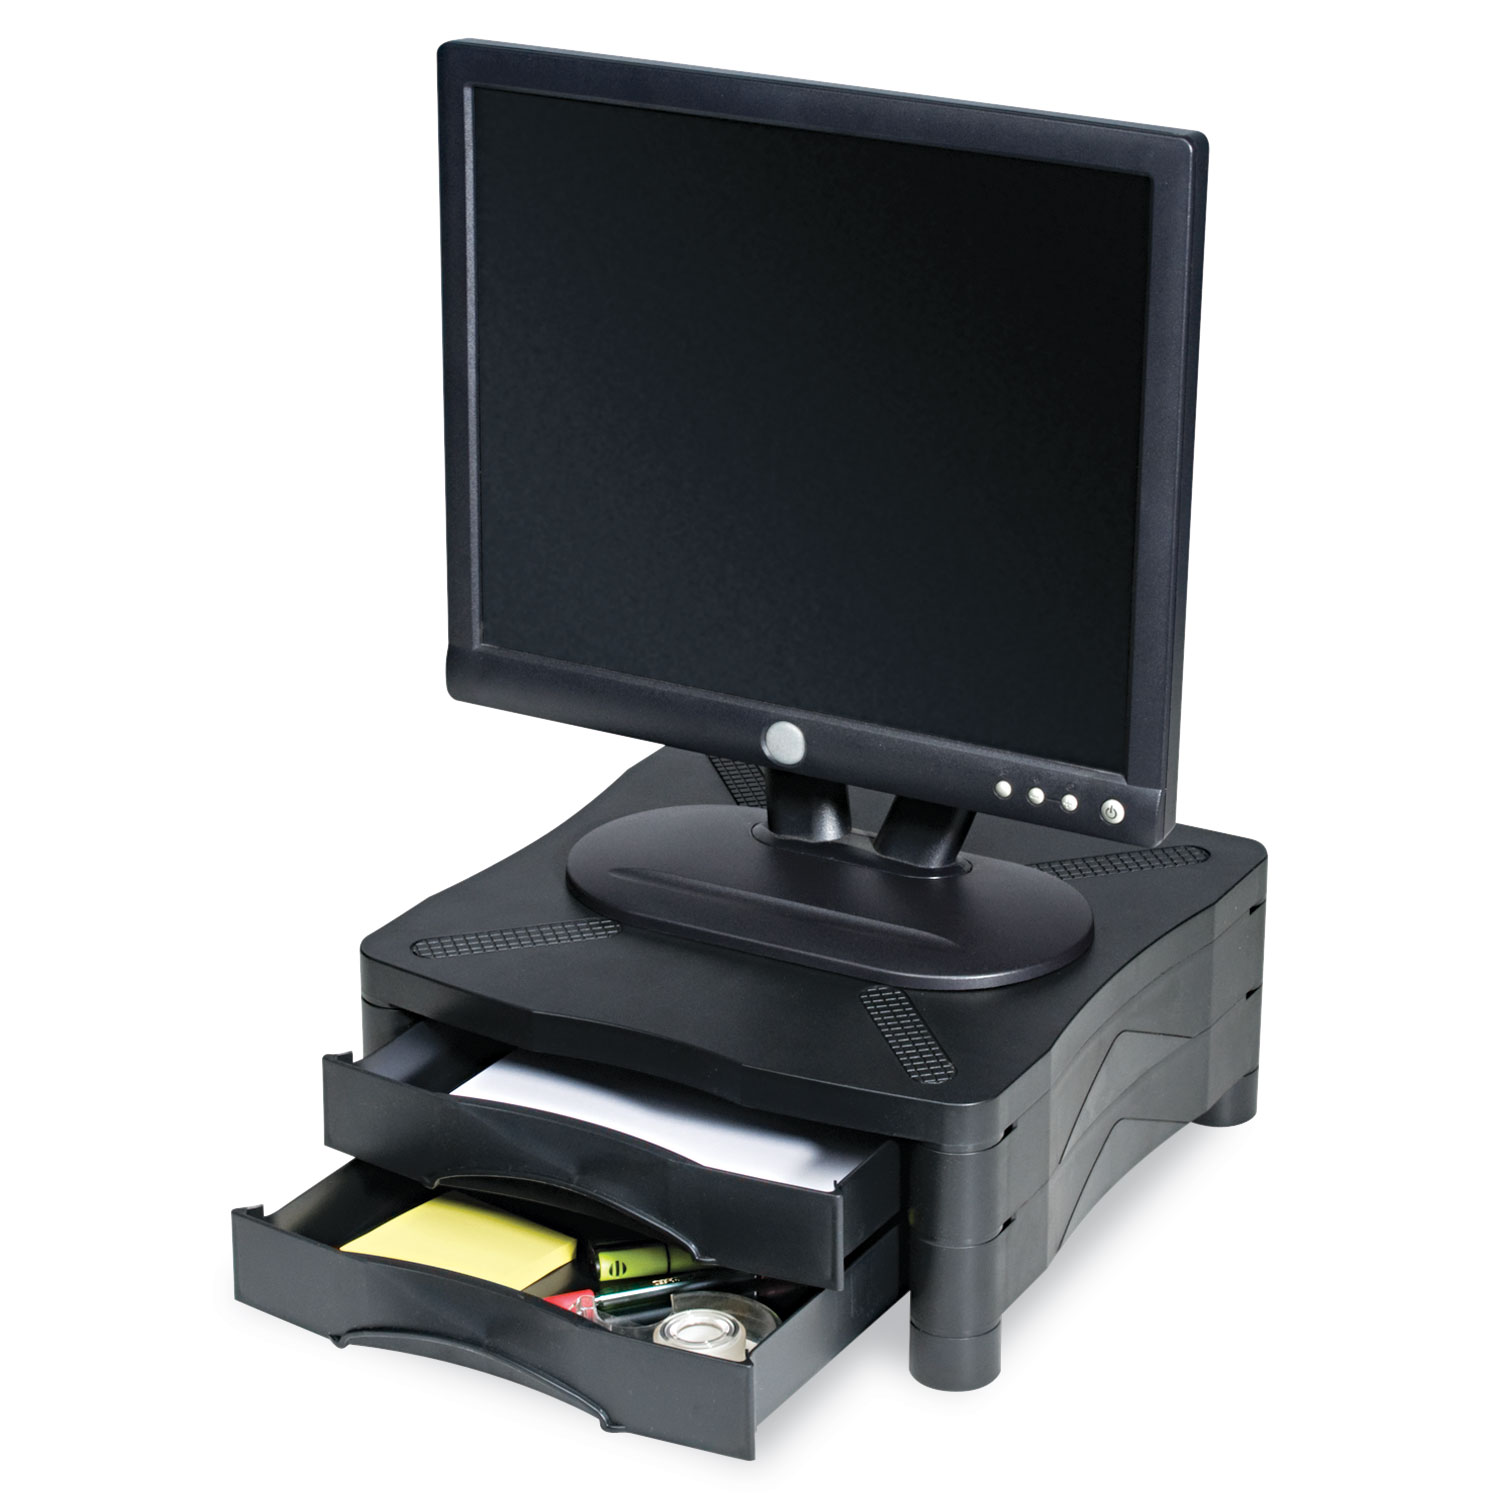  Kelly Computer Supply KCS10369 Adjustable Monitor Stand w/Double Storage Drawer, 13 x 13-1/2 x 4-3/4 to 5-3/4 (KCS10369) 